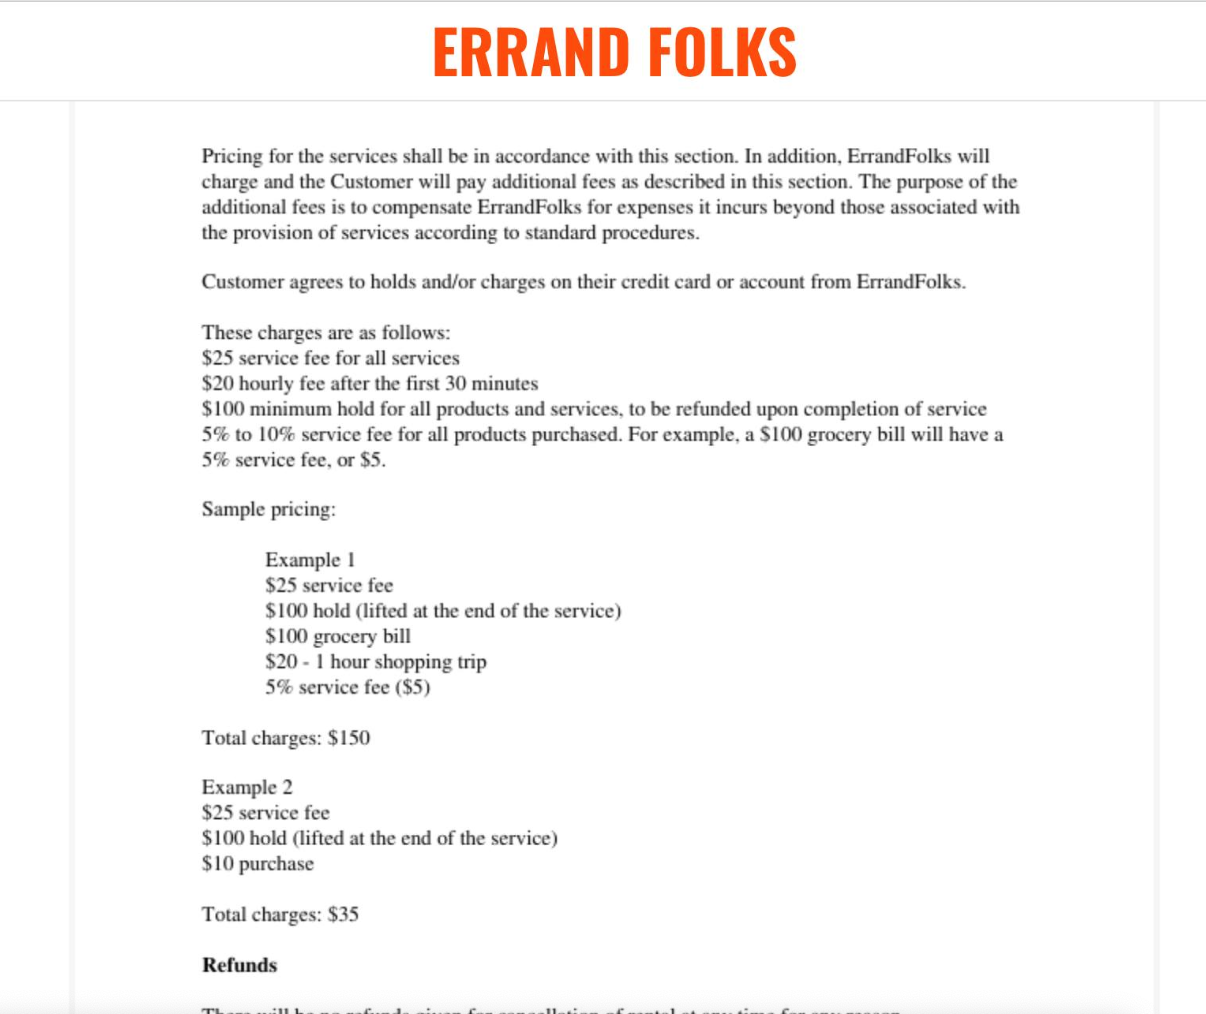 This is a description of the screenshot of ErrandFolks' Terms of Services page. A job sample was included in Errands’ Terms of Service to give a better description of what patrons would be paying for: "$25 service fee for all services, $20 hourly fee after the first 30 minutes, $100 minimum hold for all products and services to be refunded upon completion of service, [and] 5% to 10% service fee for all products purchased. For example, a $100 grocery bill will have a 5% service fee, or $5. Sample pricing: Example 1. $25 service fee, $100 hold (lifted at the end of the service), $100 grocery bill, $20 - 1 hour shopping trip, 5% service fee ($5), Total charges: $150"